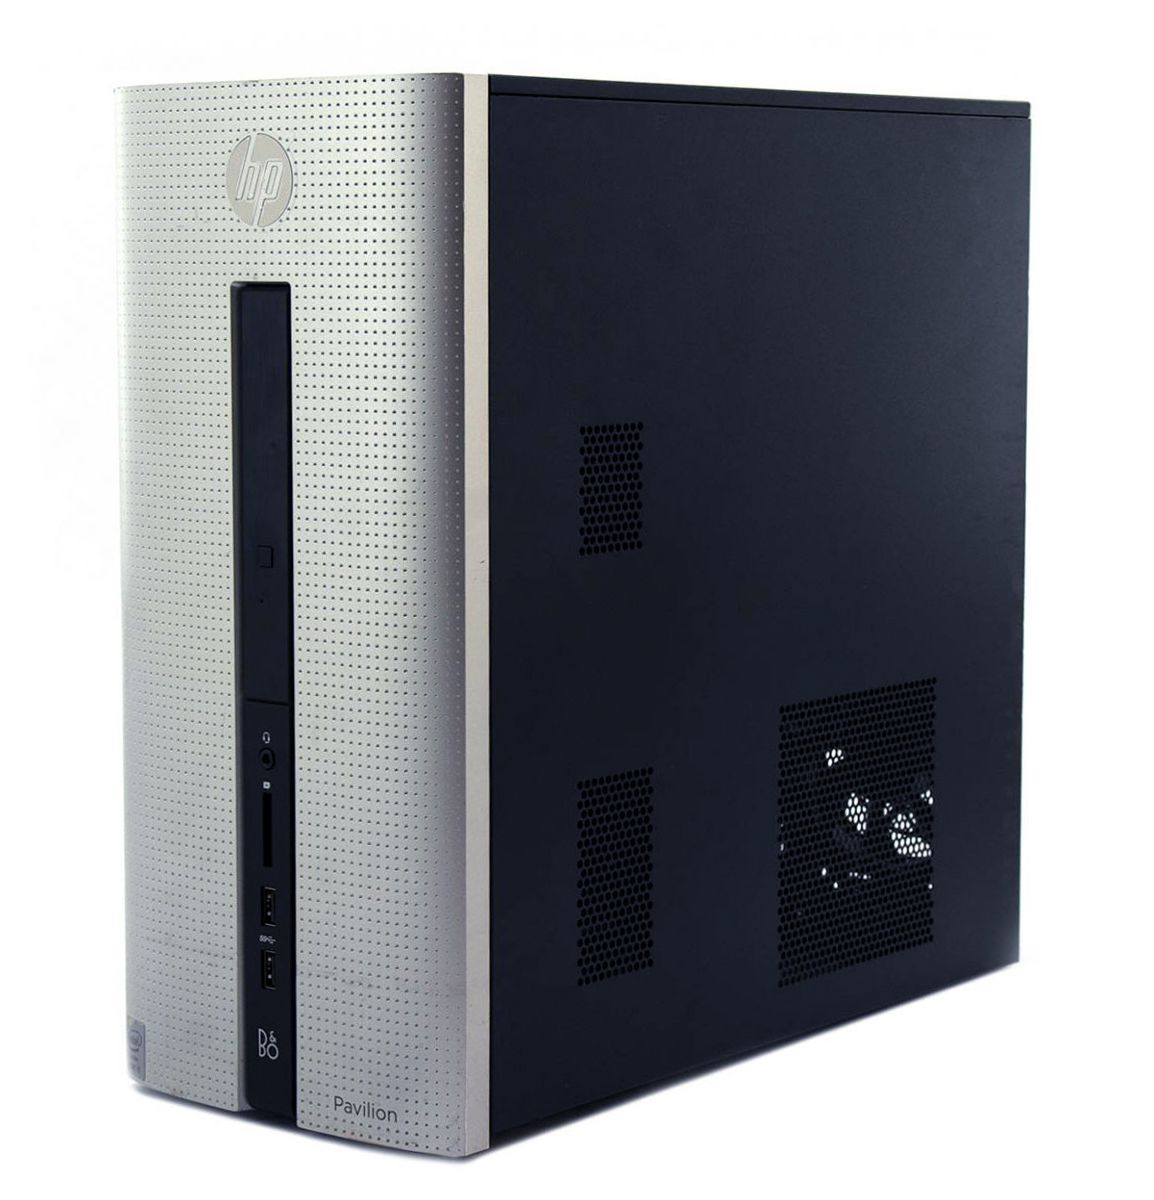 HP Pavillion 550-110 Tower Computer i3-4170 Windows 10 - from PCLiquidations